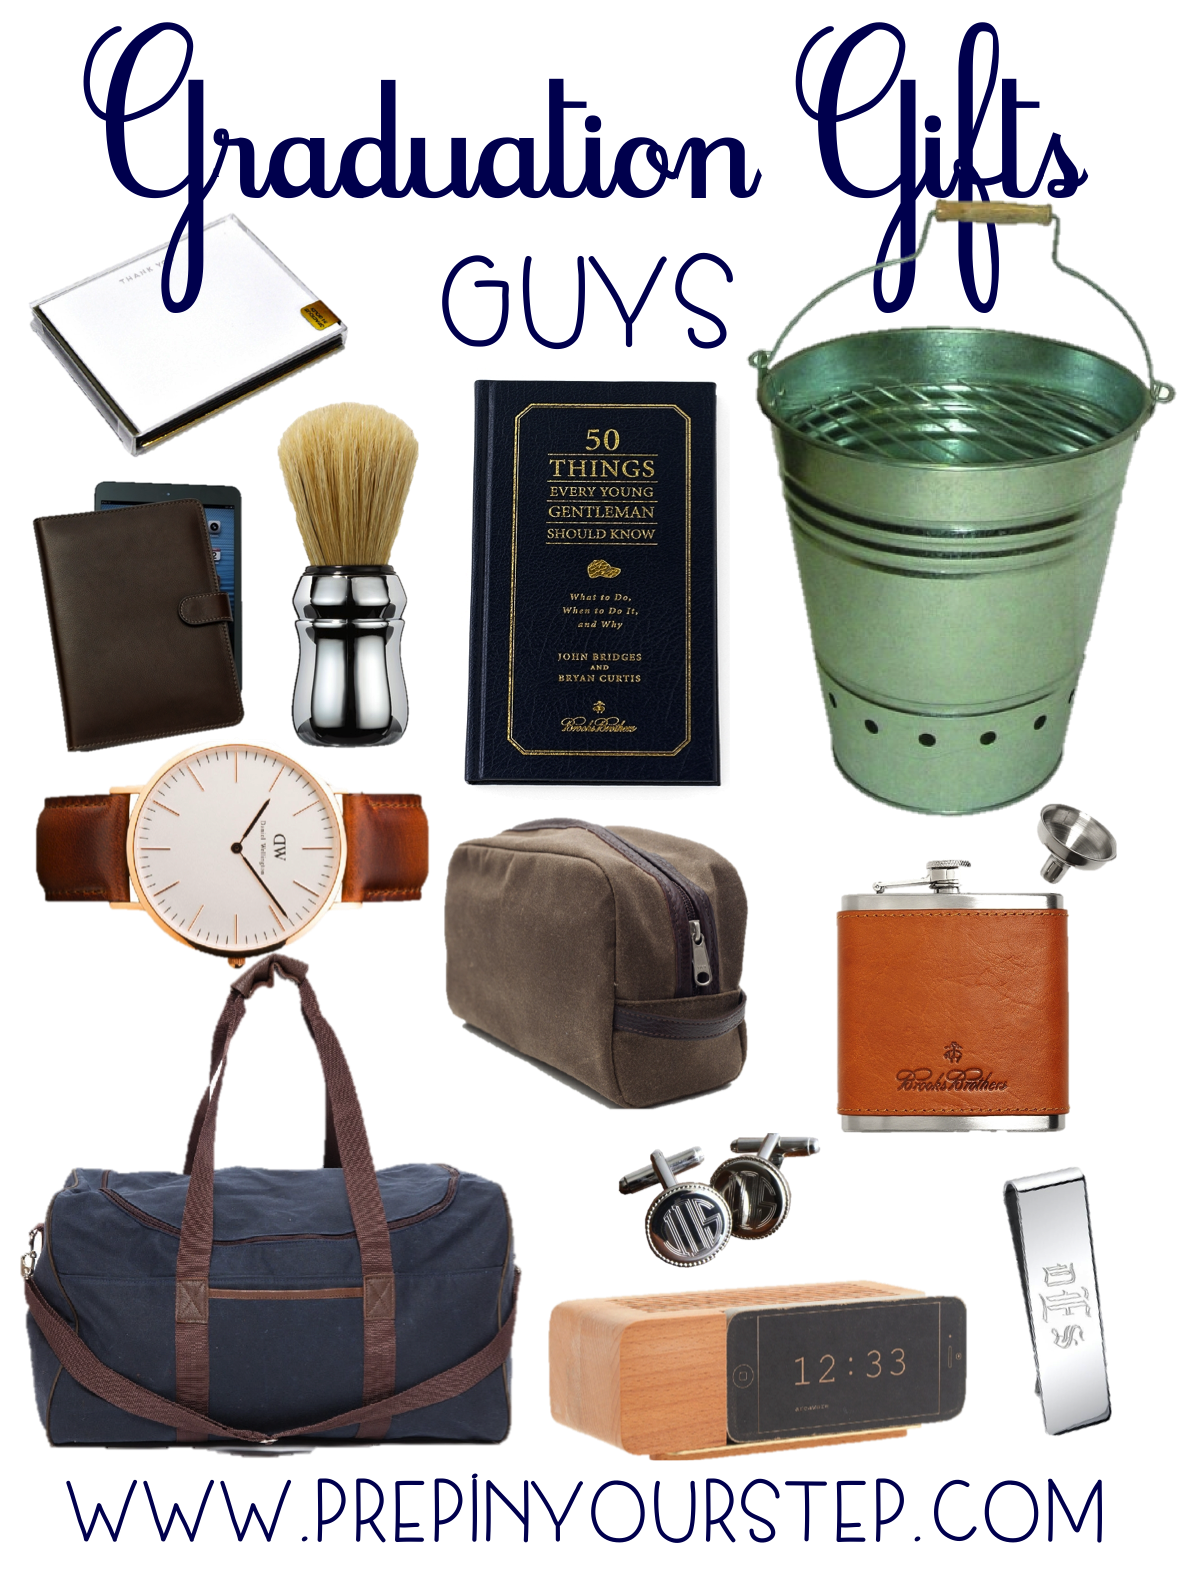 Prep In Your Step: Graduation Gift Ideas: Guys & Girls